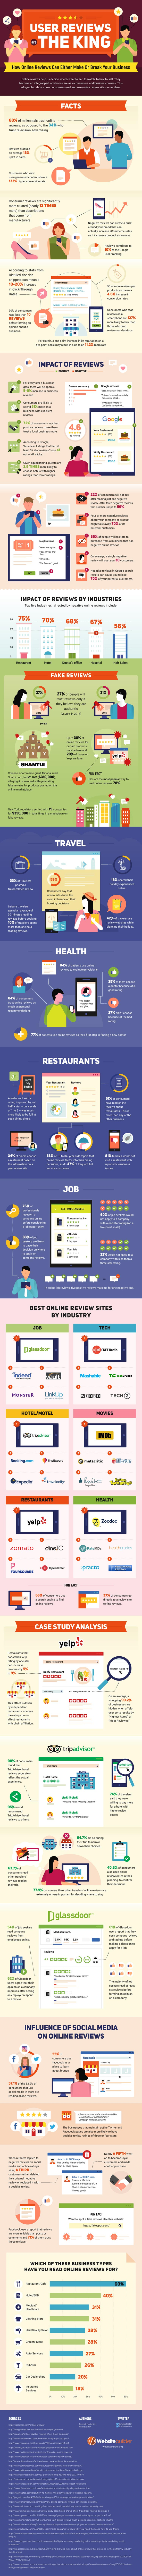 onlinereview-infographic